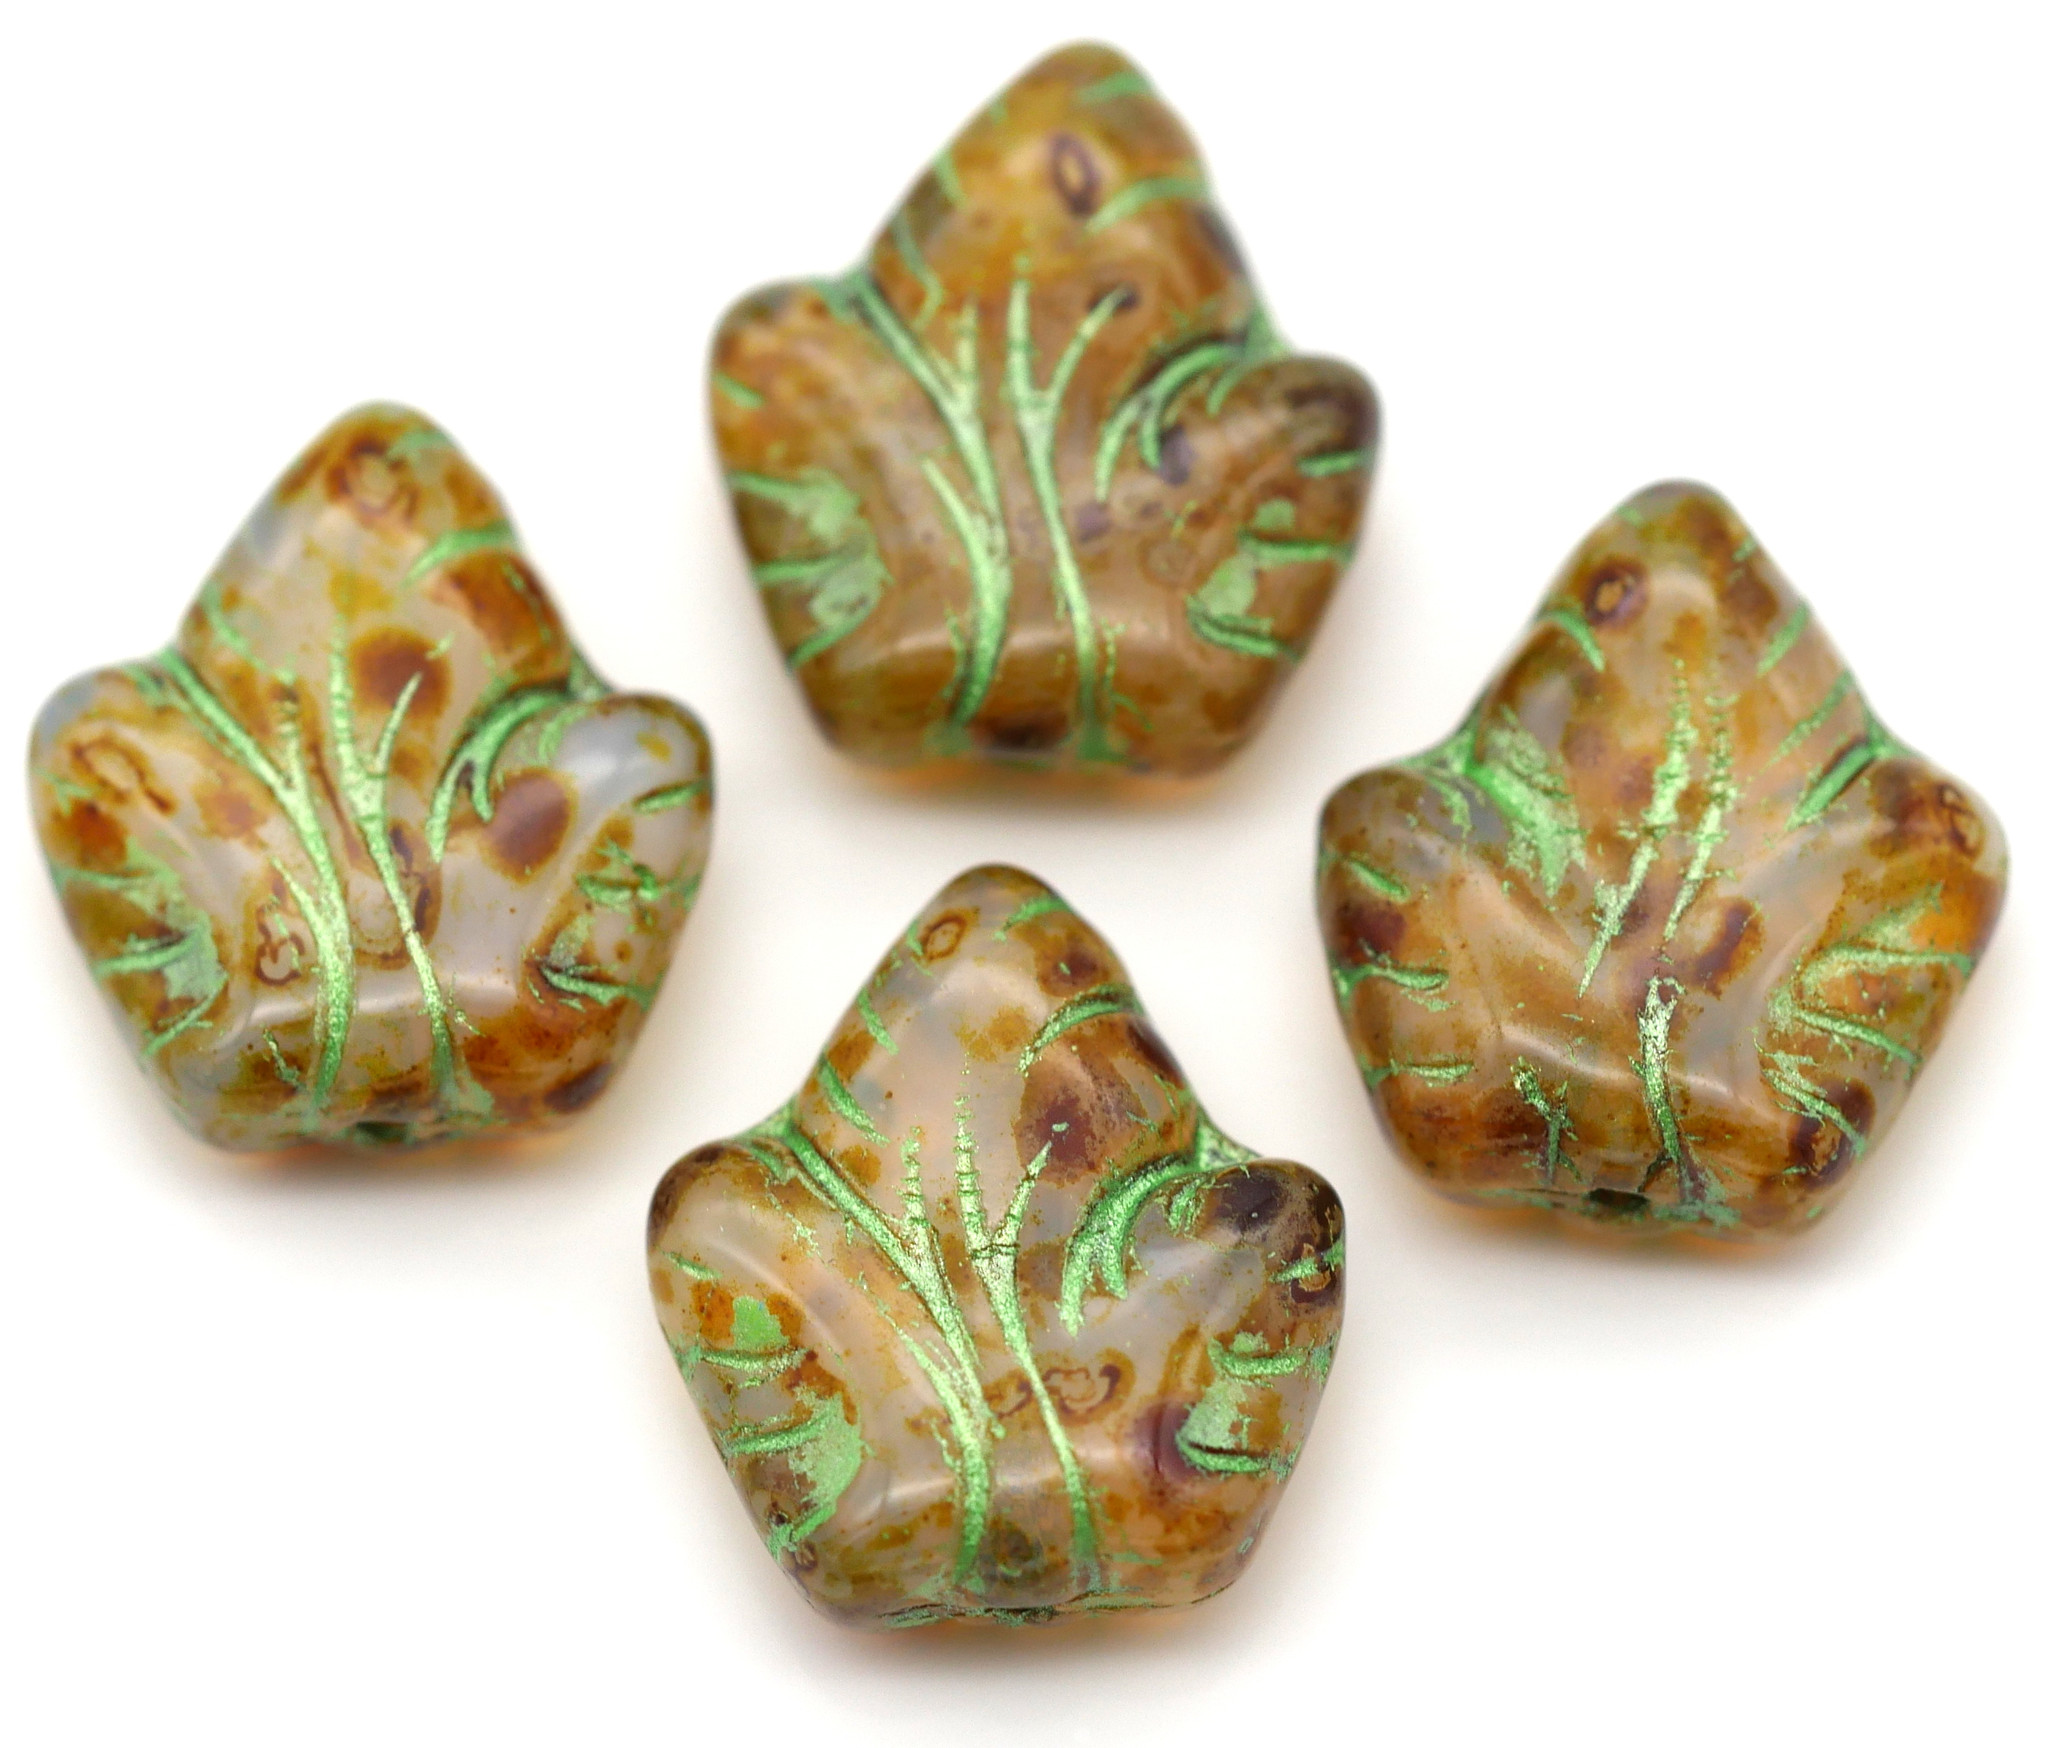 4pc 16x14mm Czech Pressed Glass Ivy Leaf Beads, White Opal/Picasso